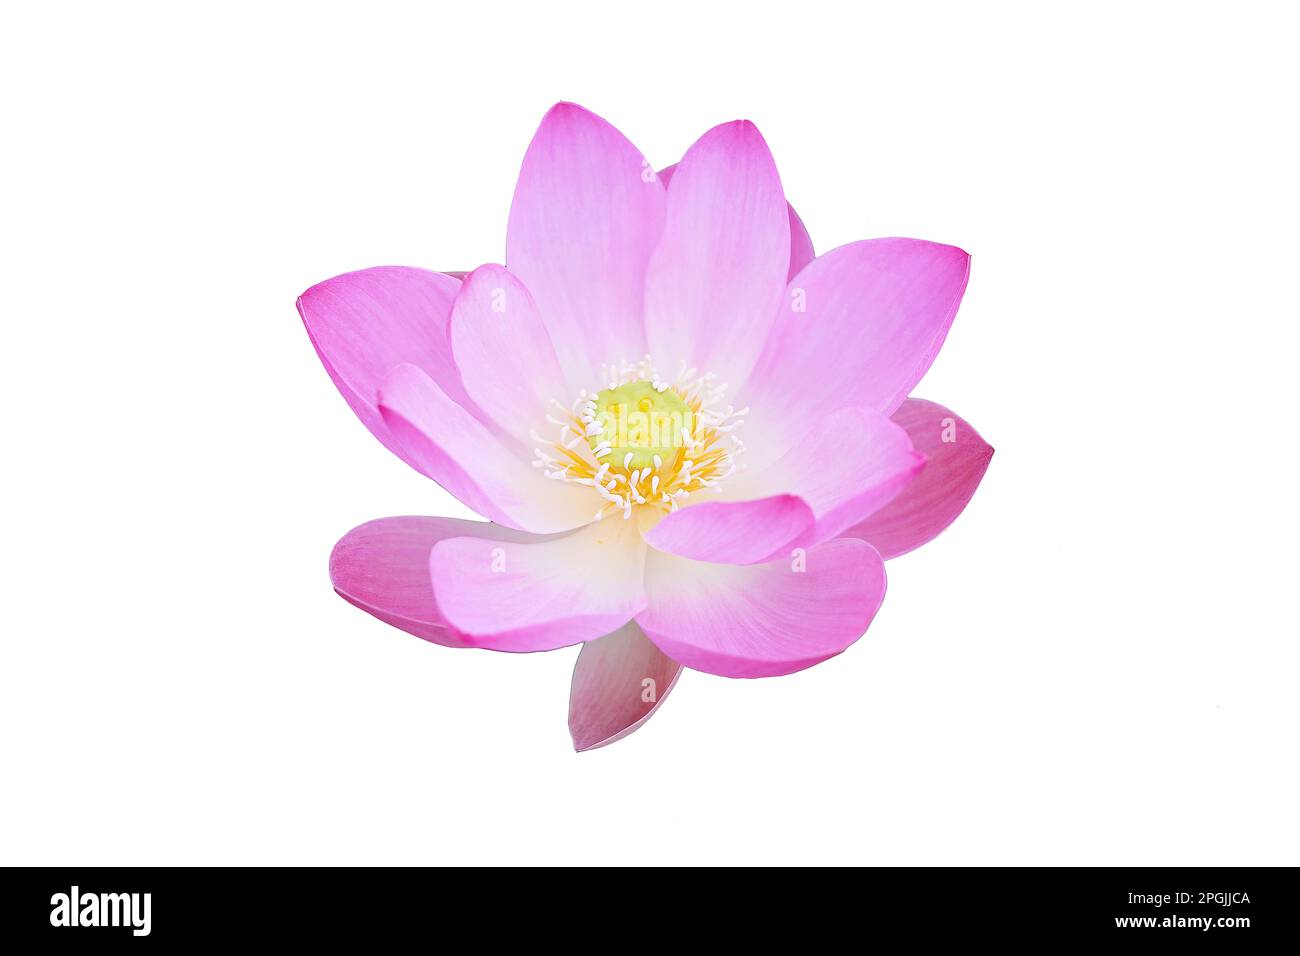 Close-up of bright pink lotus flower blossom, isolated on white background Stock Photo